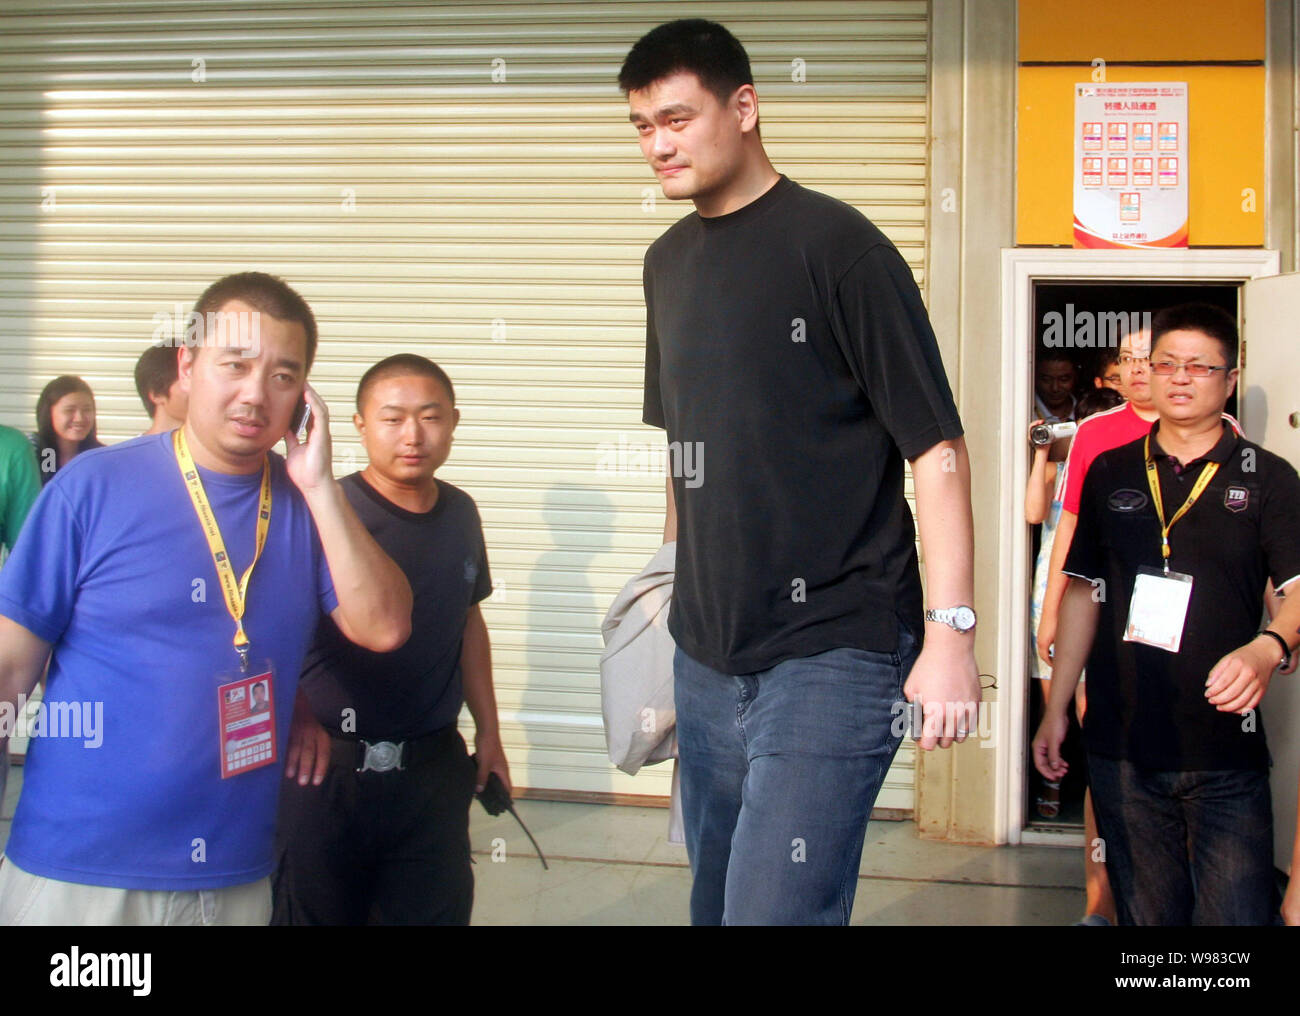 Chinese basketball player Yao Ming (C) is pictured at a training center of China mens basketball team during the Asian Basketball Championship in Wuha Stock Photo